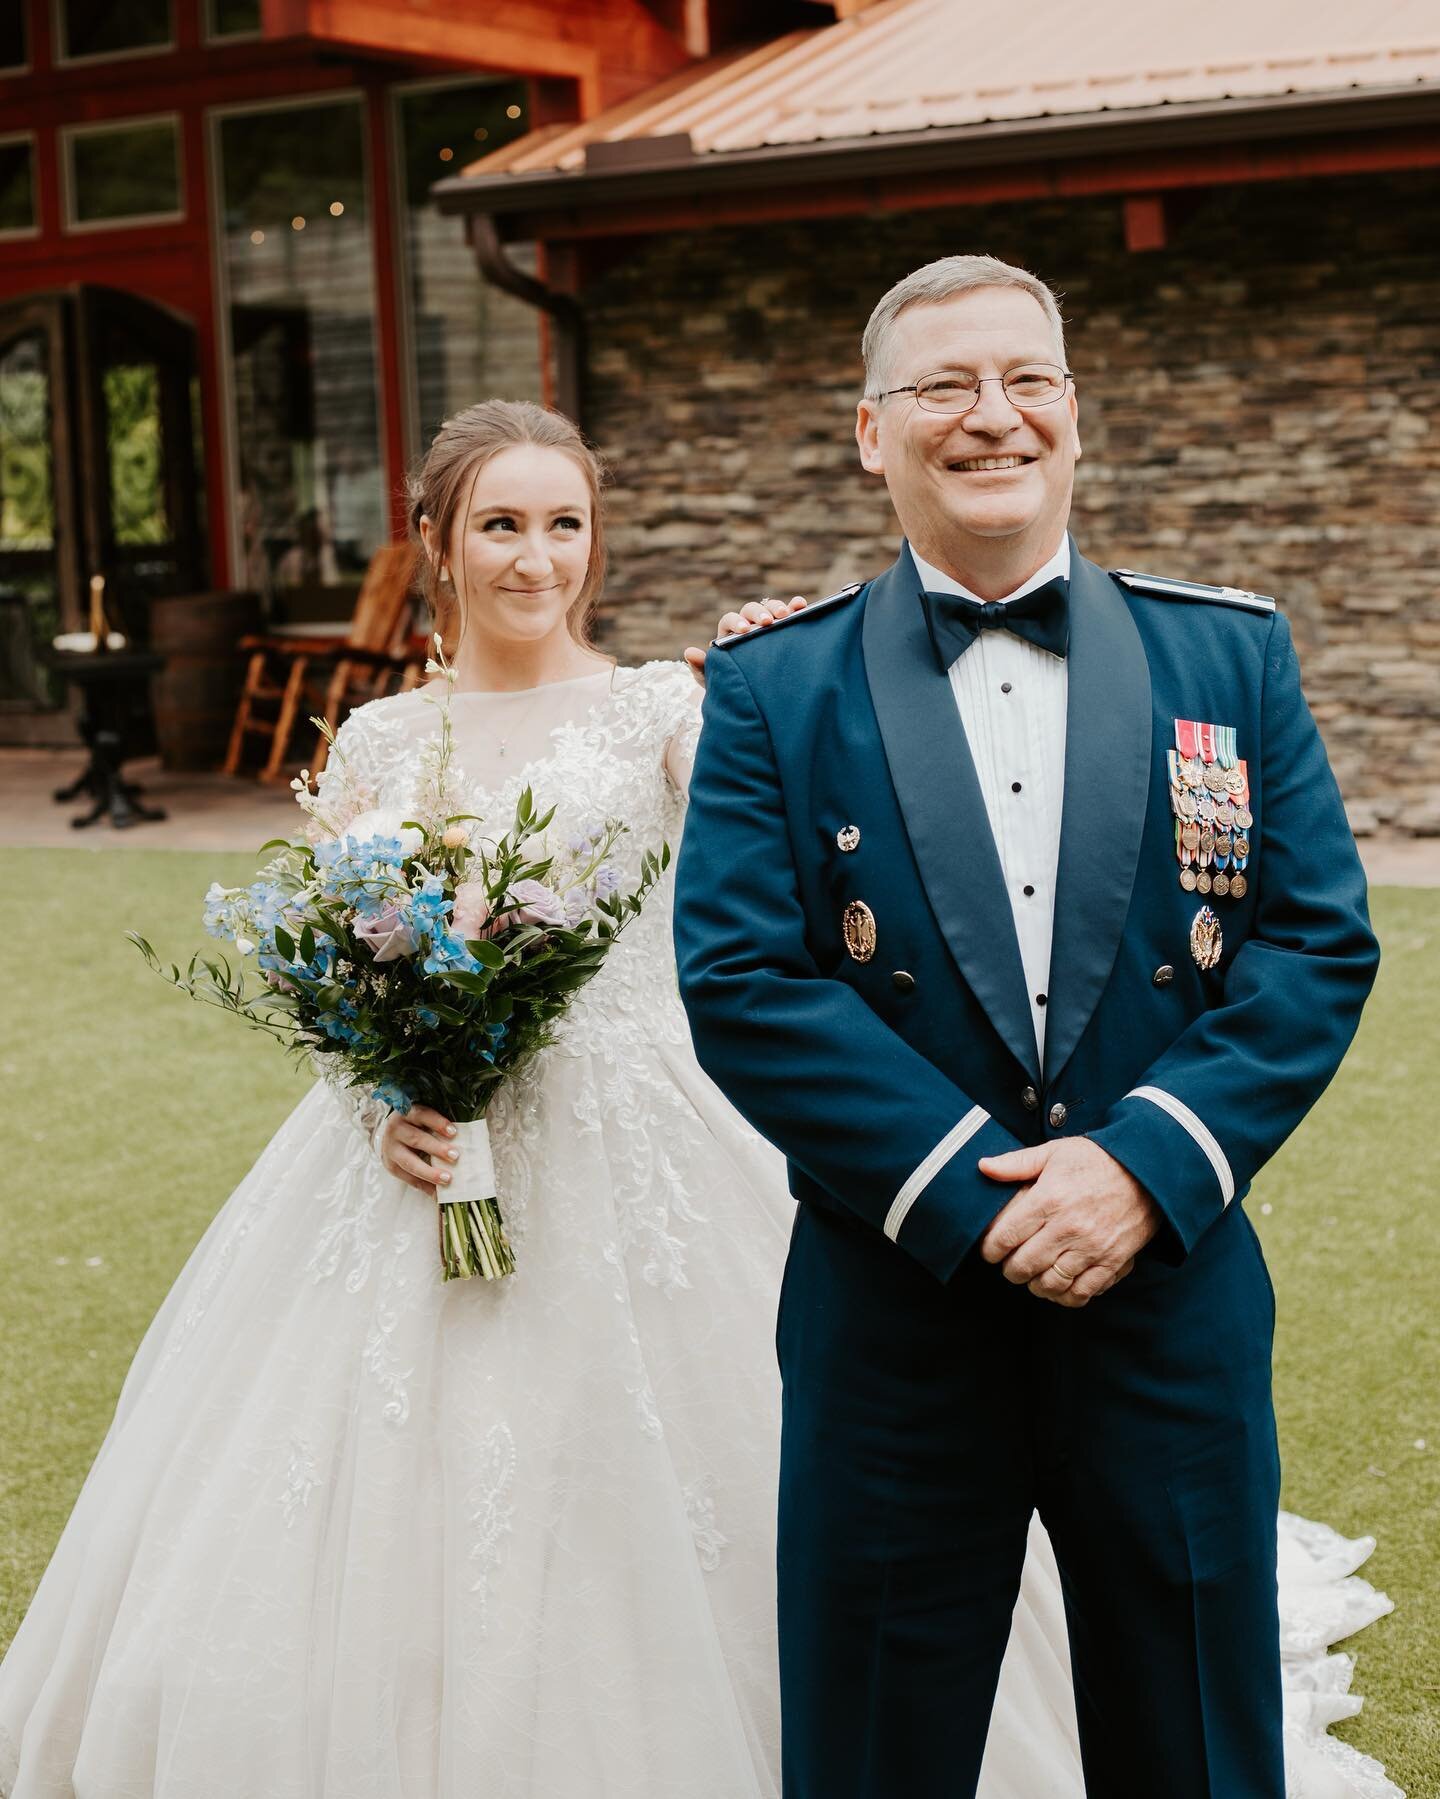 Father daughter first looks are sometimes more emotional than the bride and groom first look. Remember he loved her first. 

#tennessee #knoxville #wedding #weddingphotography #weddingphotographer #photo #photographer #photooftheday #fatherdaughter #